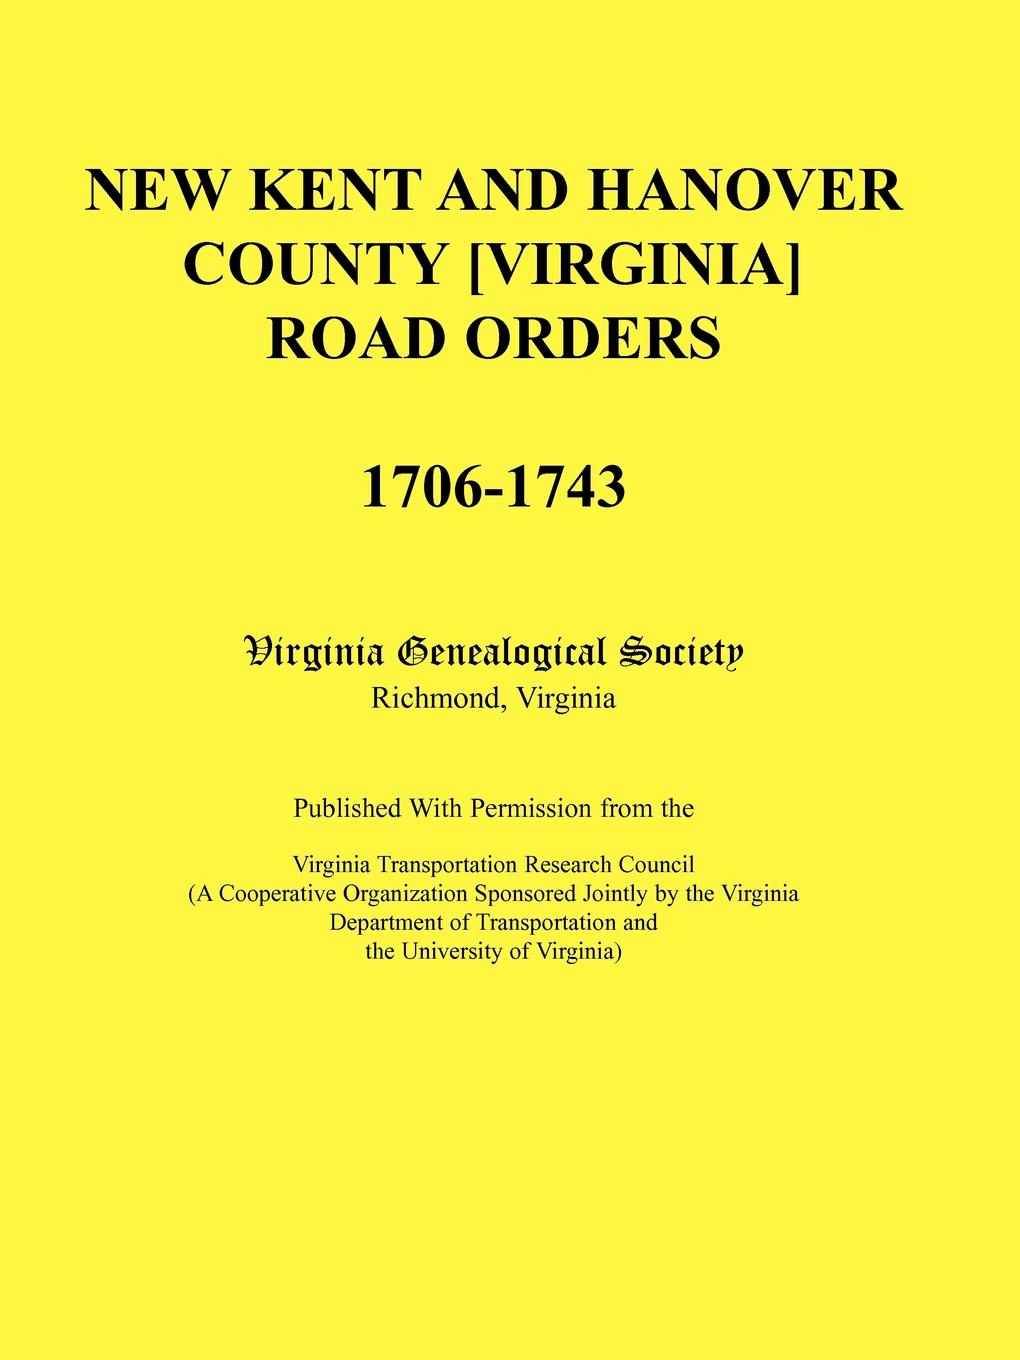 New Kent and Hanover County .Virginia. Road Orders, 1706-1743. Published With Permission from the Virginia Transportation Research Council (A Cooperative Organization Sponsored Jointly by the Virginia Department of Transportation and the Universit...